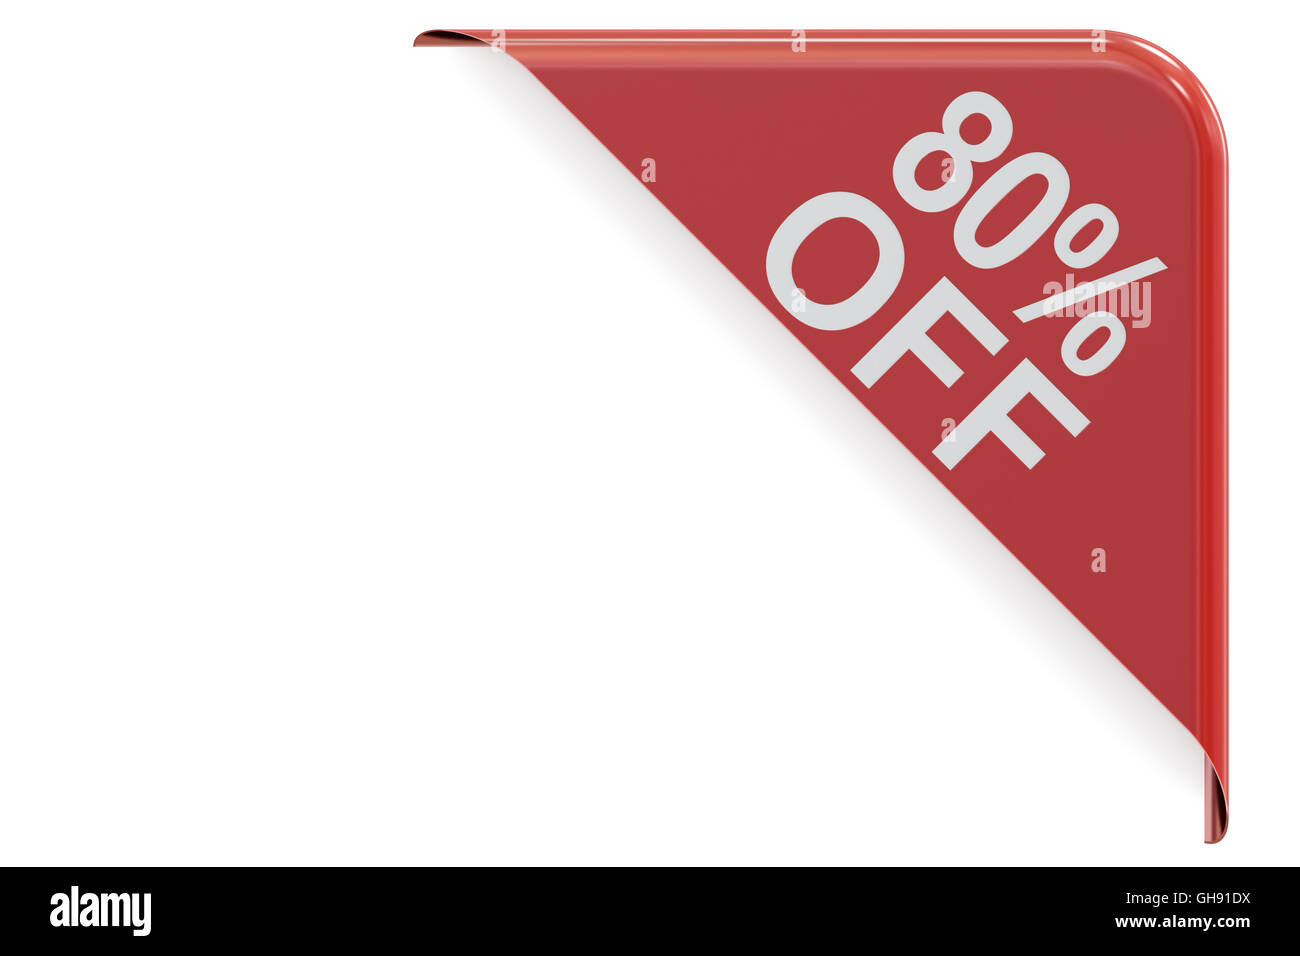 sale and discount concept, 80% off red corner. 3D rendering isolated on white background Stock Photo